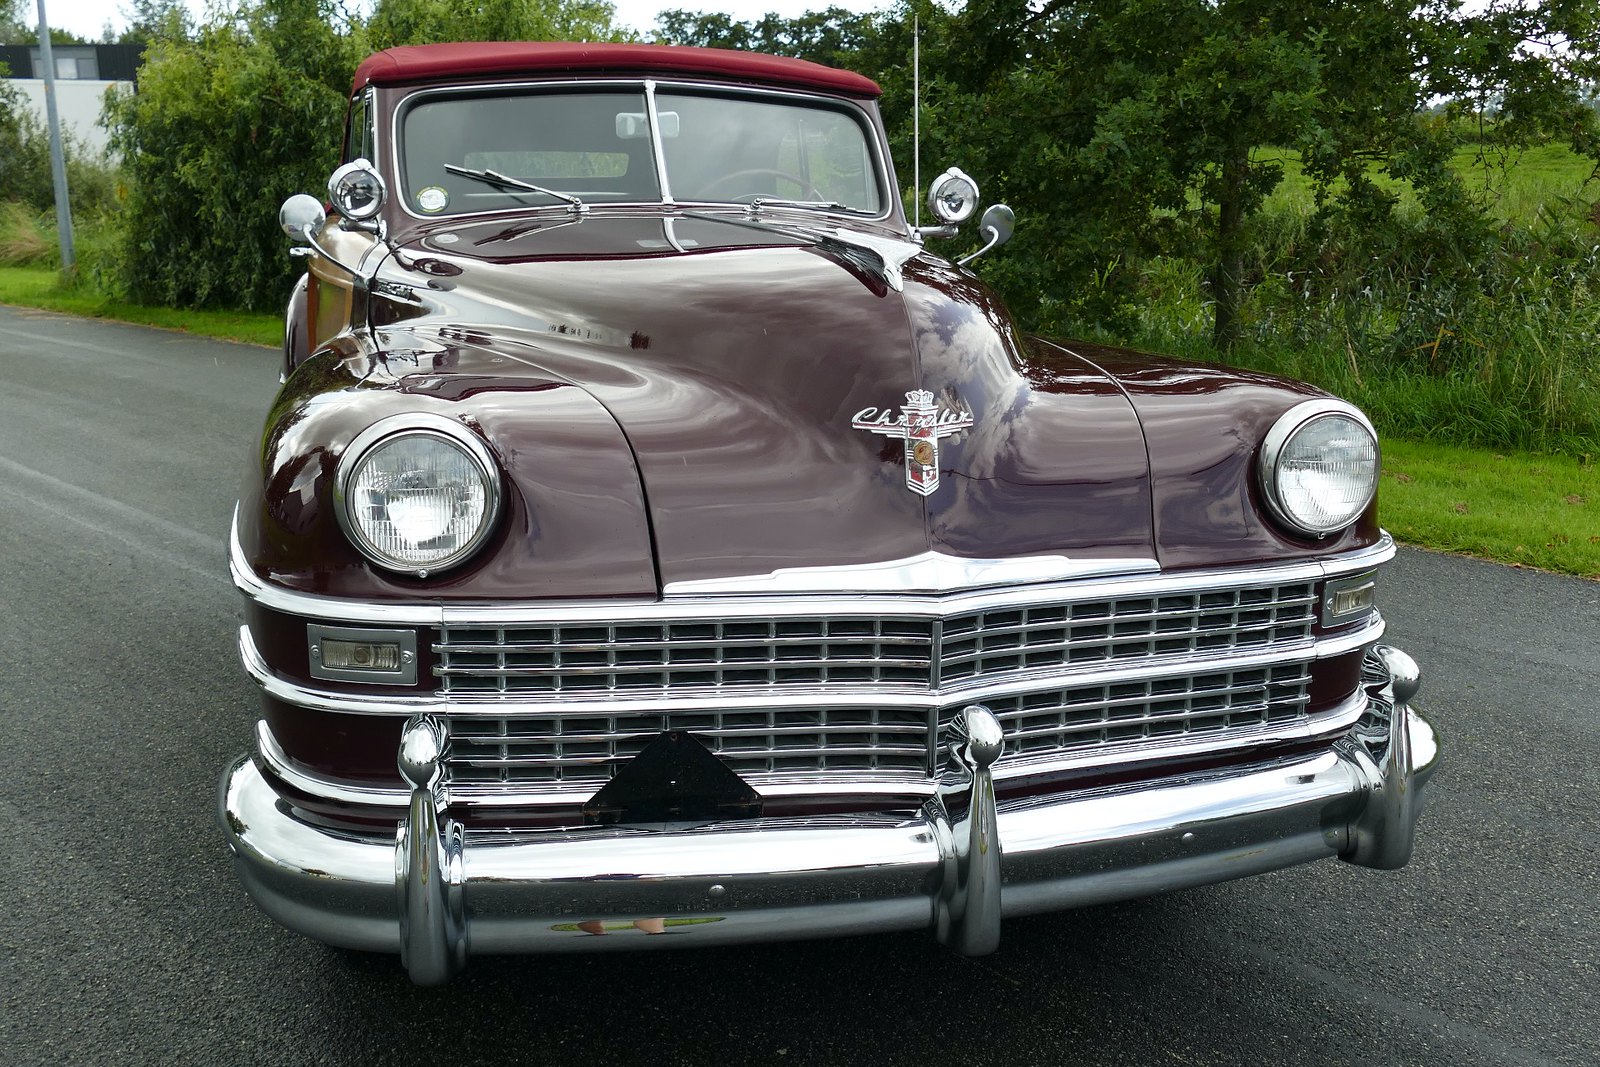 Chrysler Town & Country 1948